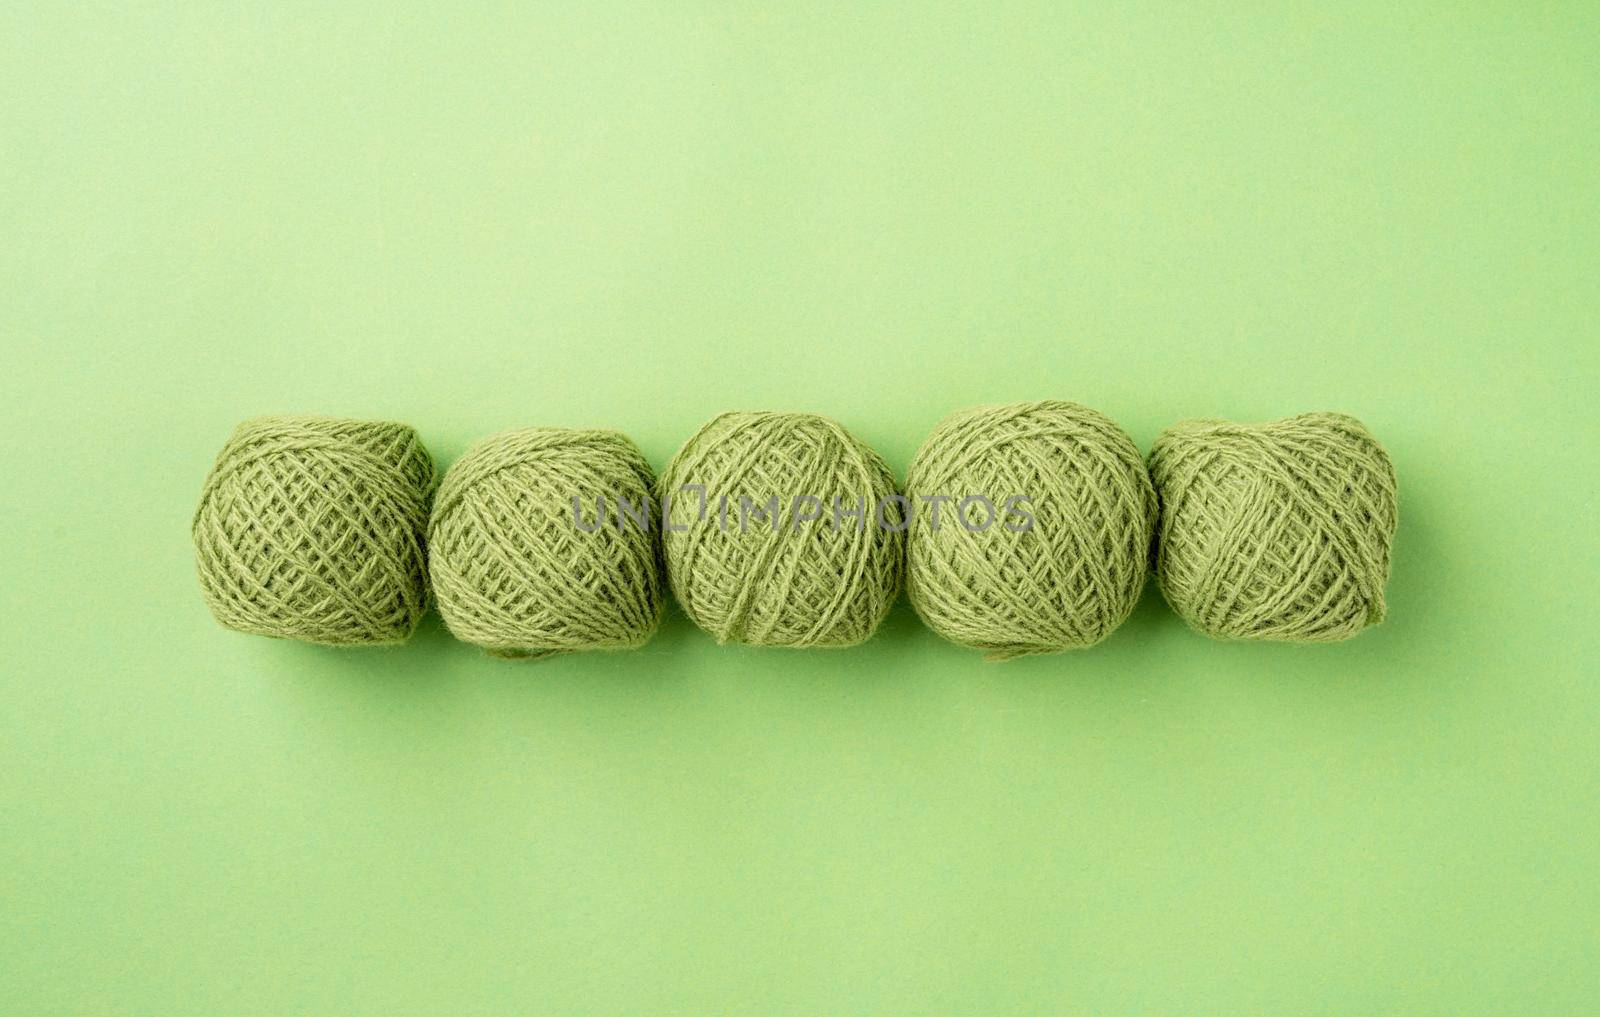 bright green yarn wool in a raw on green background, top view flat lay